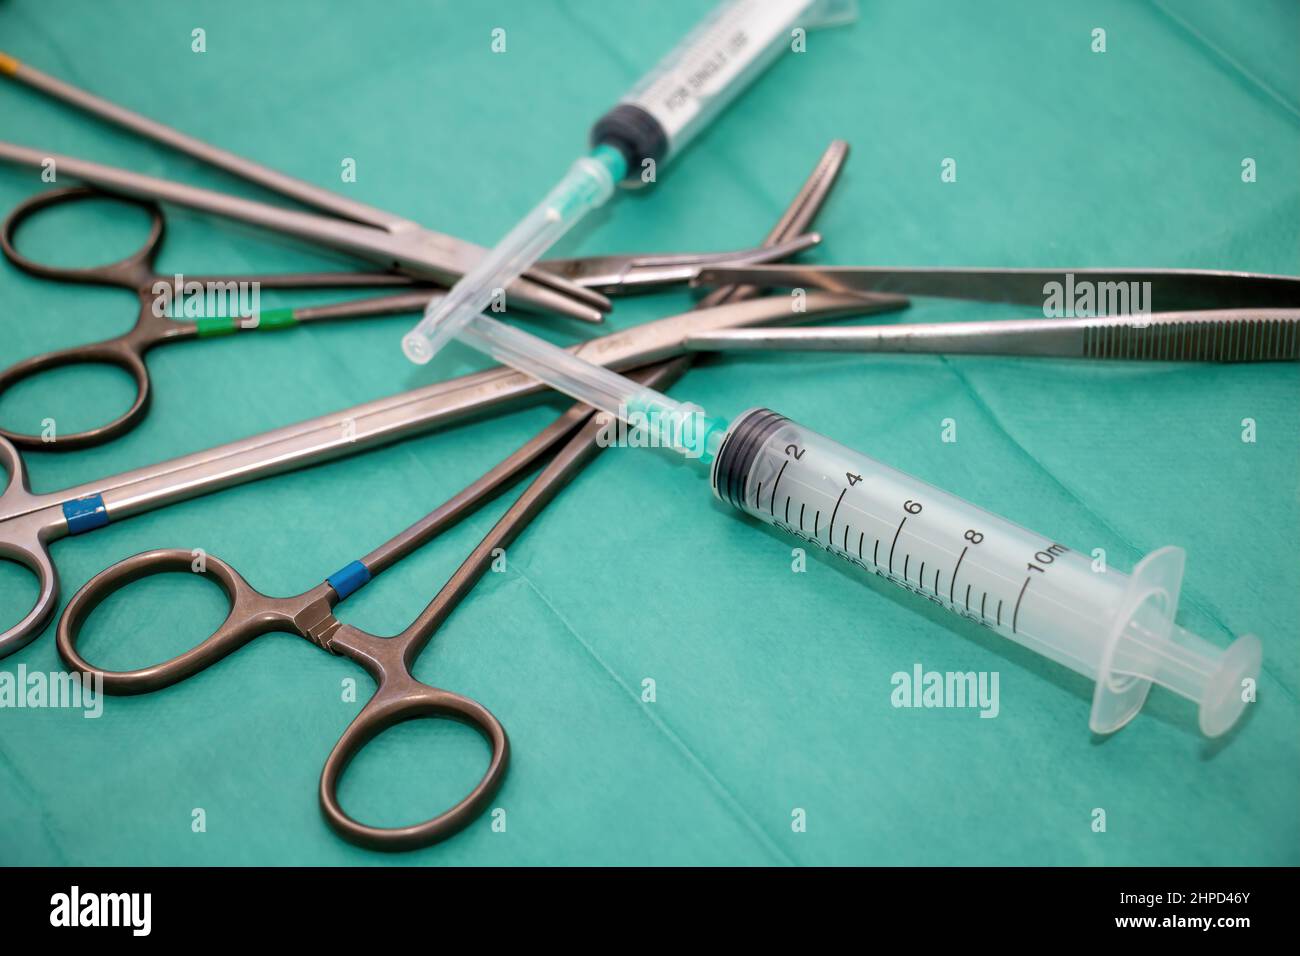 Sterilized surgical instrument on green fabric background. Surgeon doctor stainless steel tool, forceps, needle holder or driver, pincer, scissor and Stock Photo